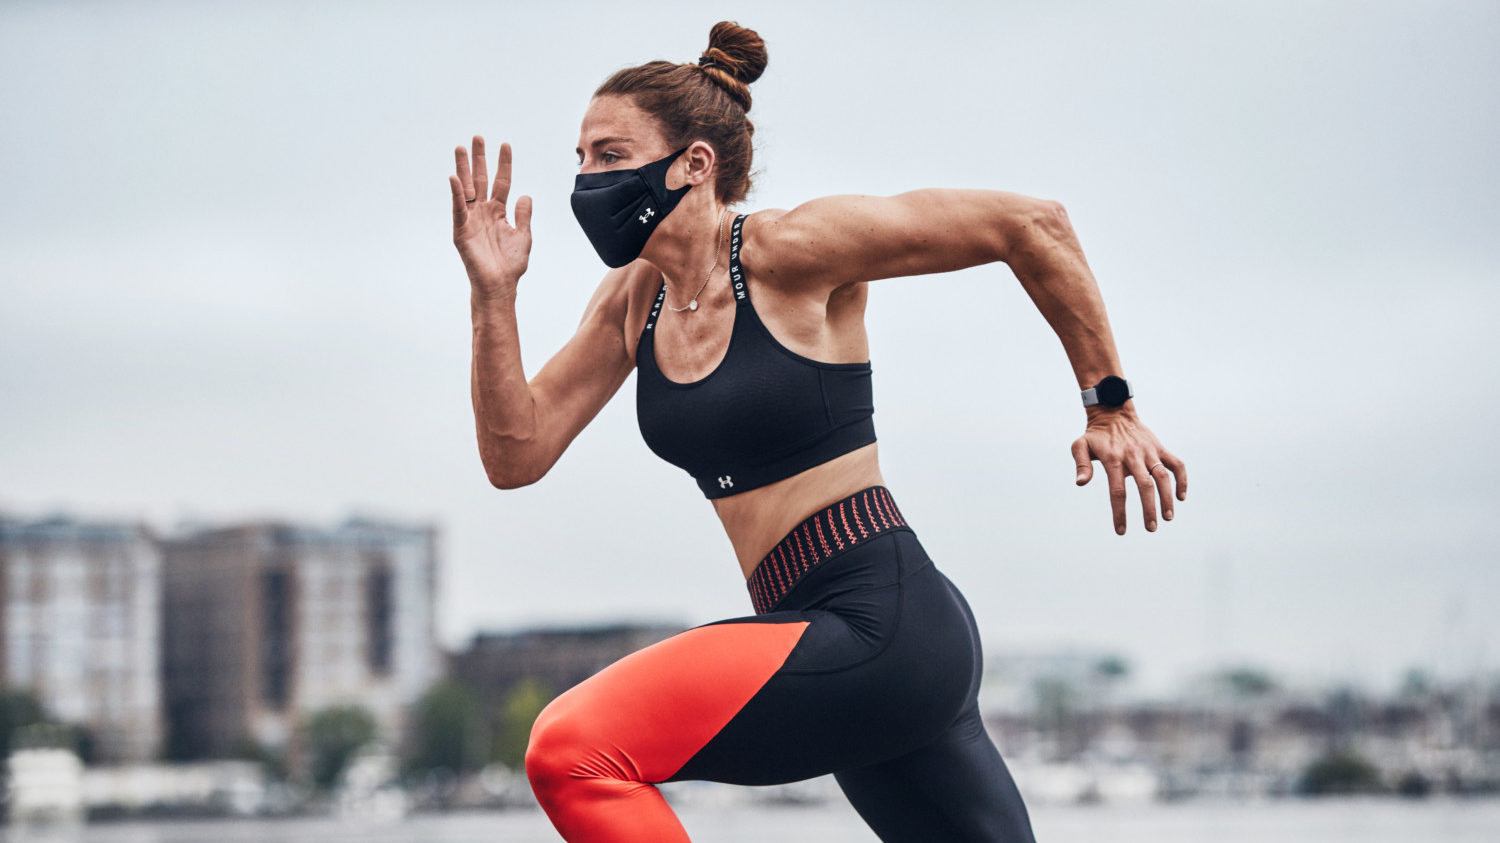 Under Armour Designed A Face Mask For Working Out - Simplemost